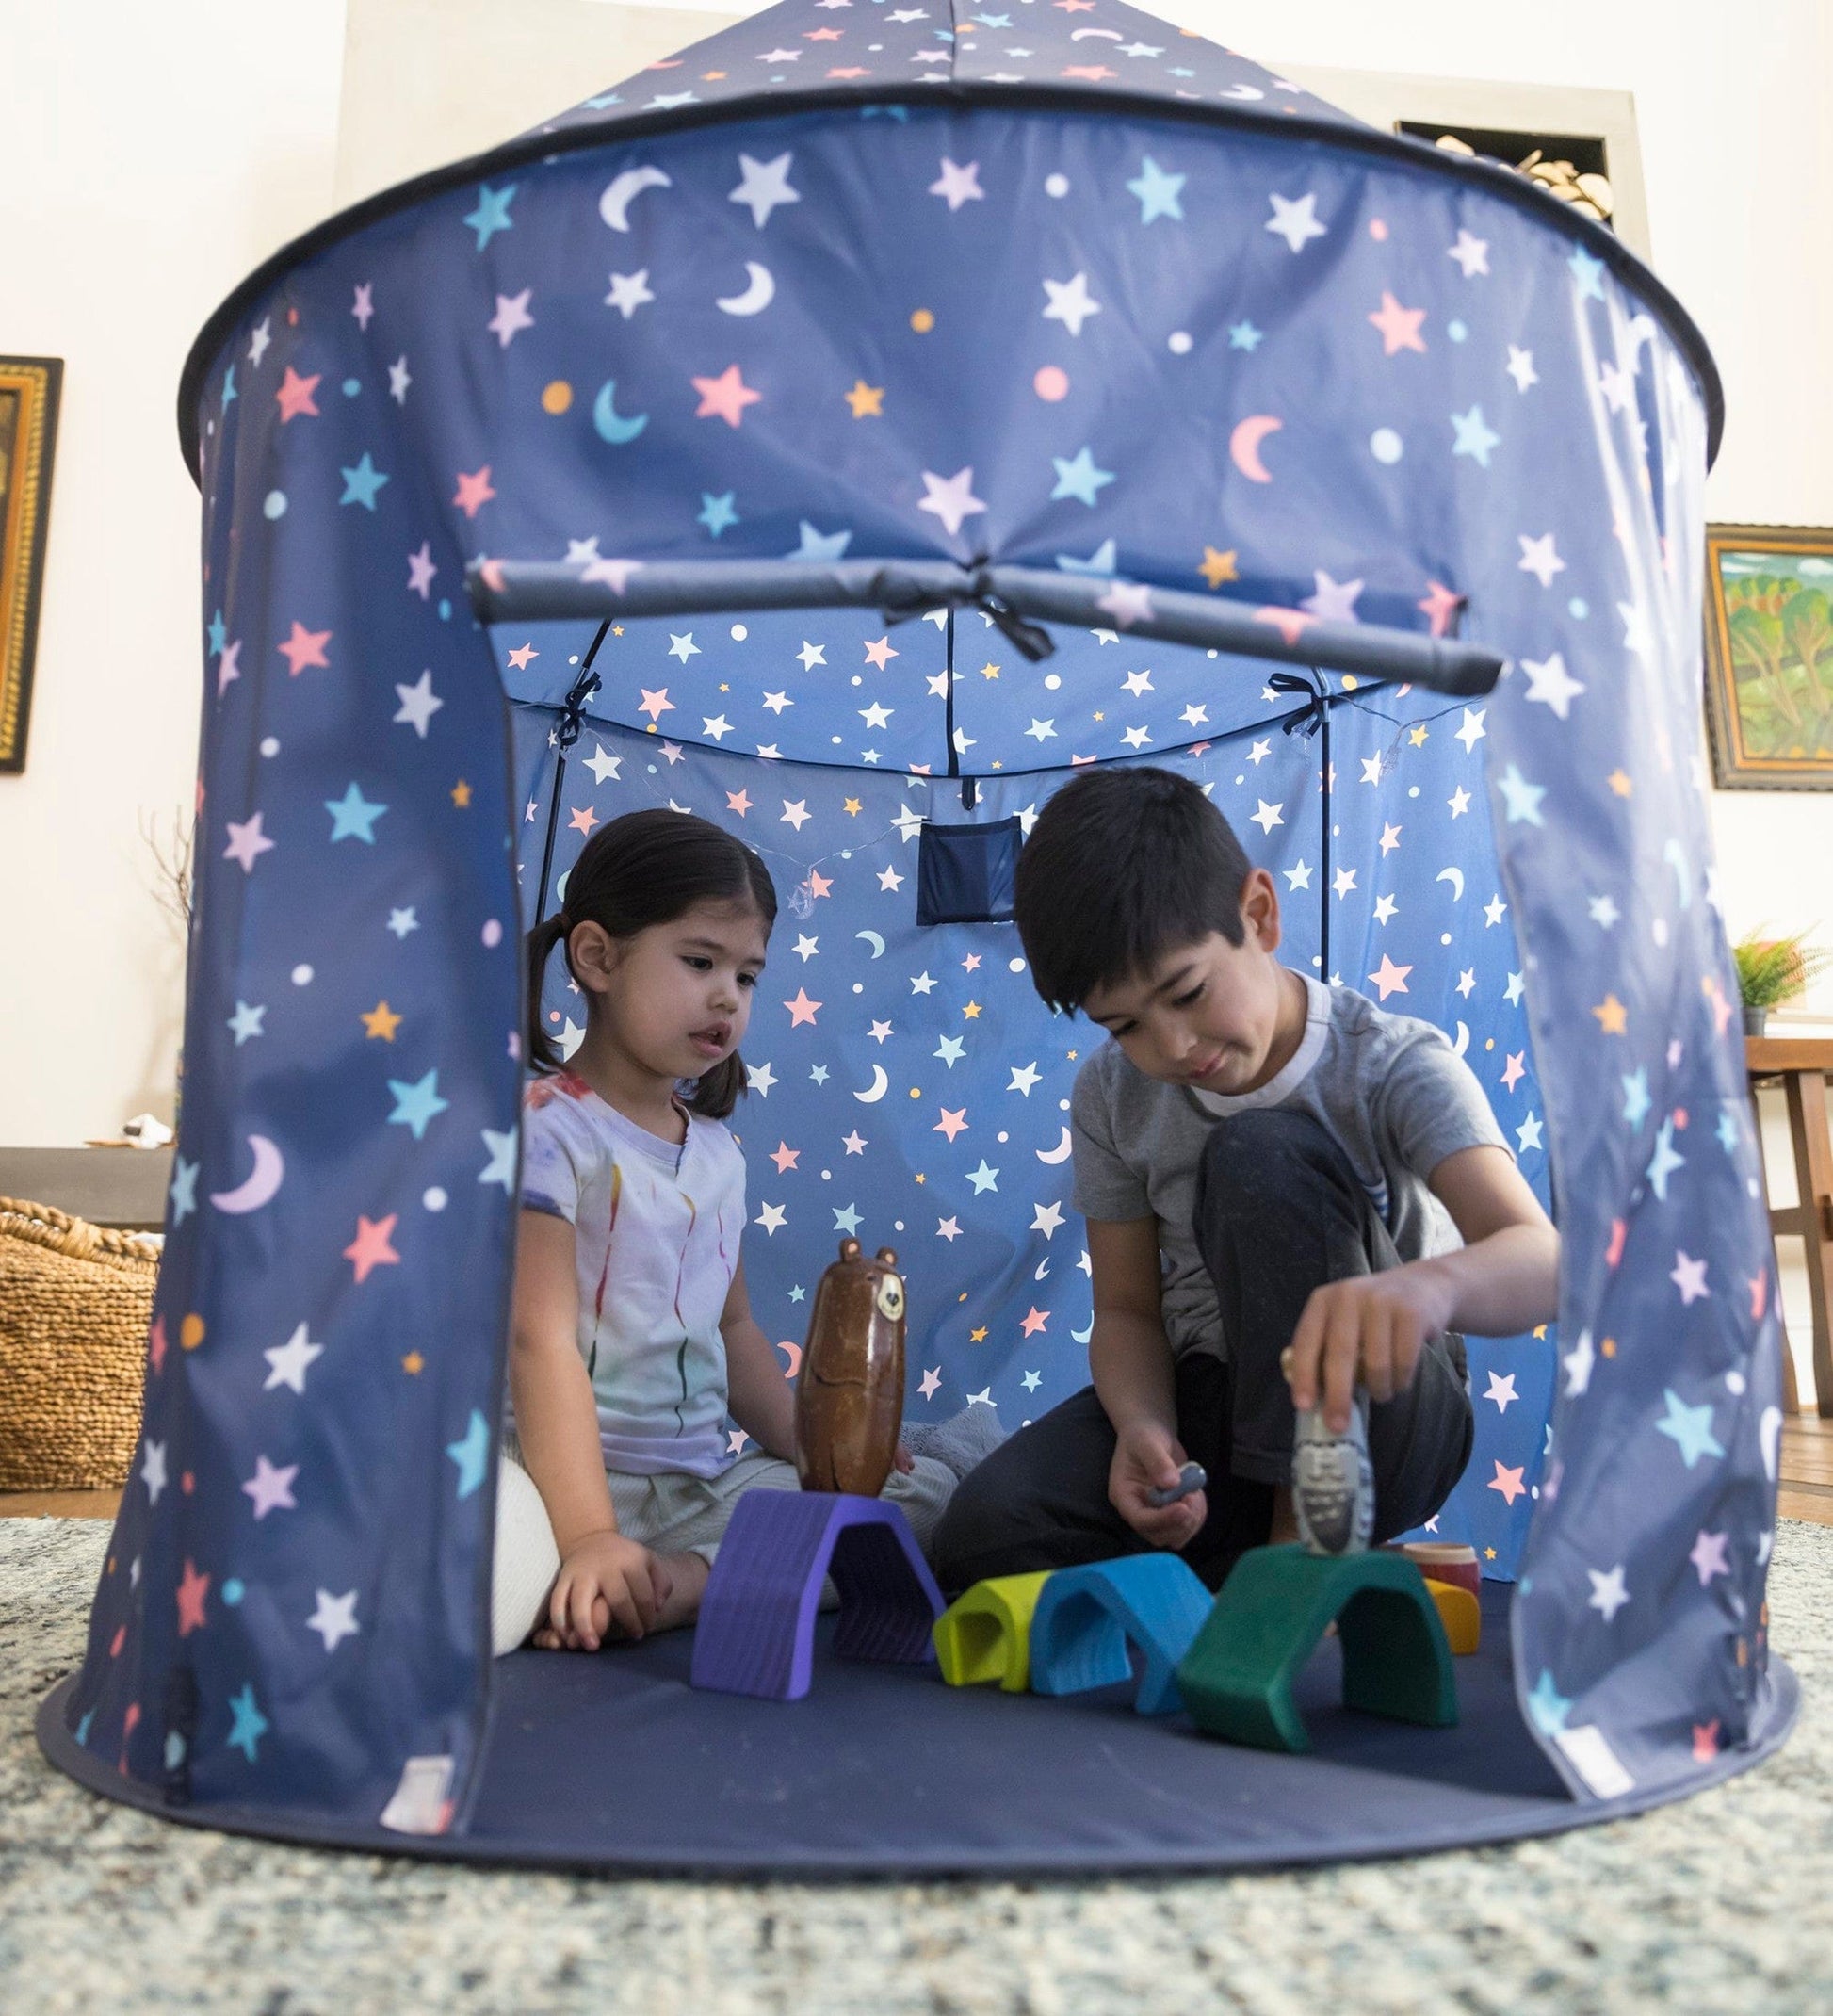 Two children sit inside the Light-Up Celestial Play Tent and play with several toys.